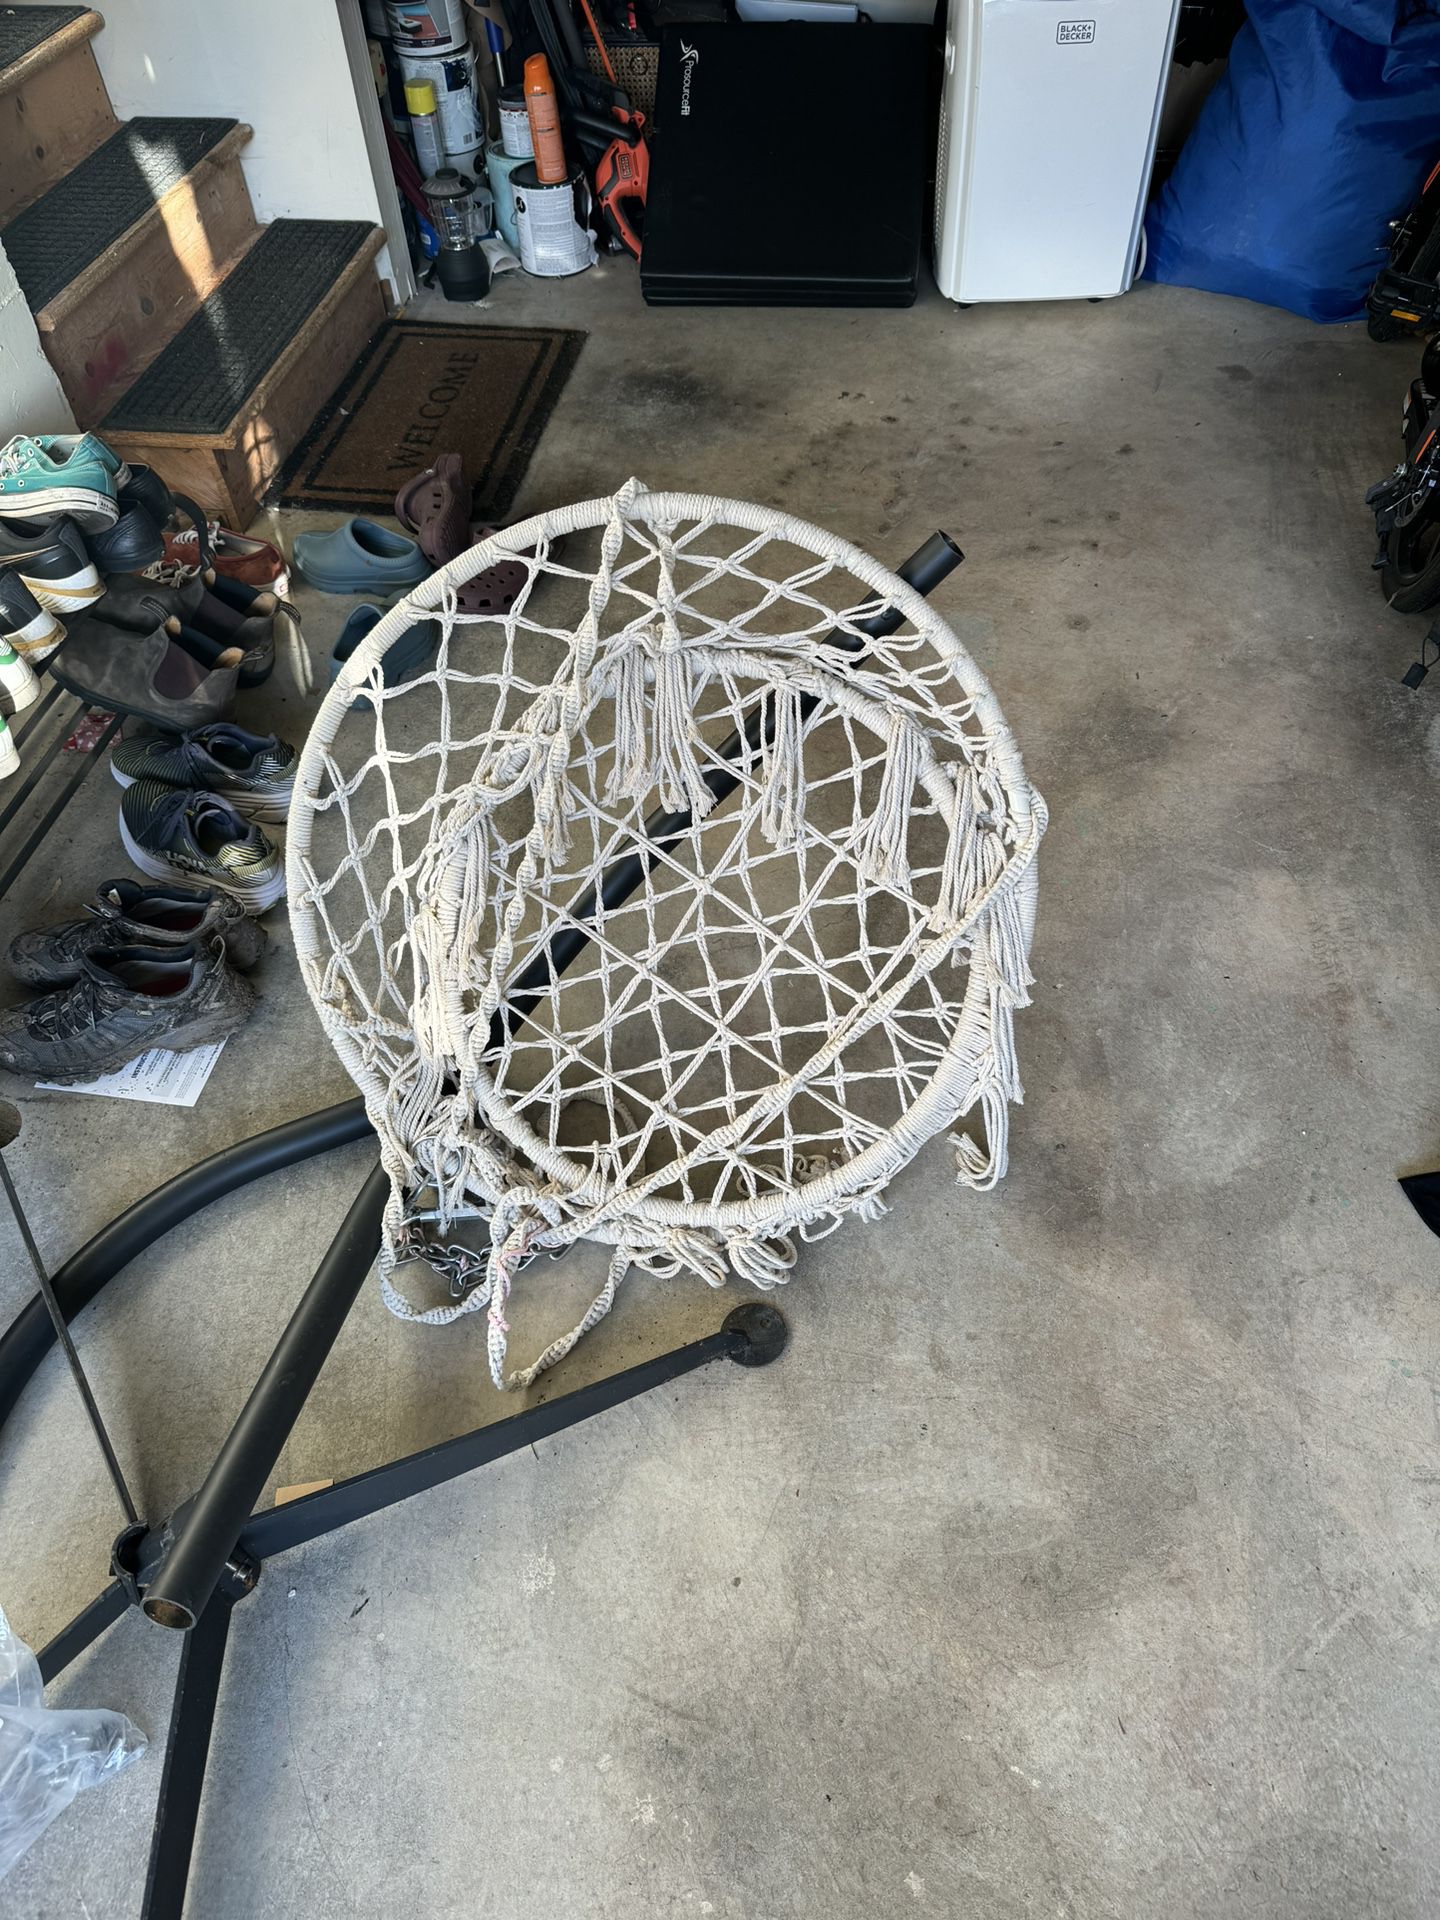 Price Drop Hanging Chair Frame With Chair (for Inside Or Patio) 